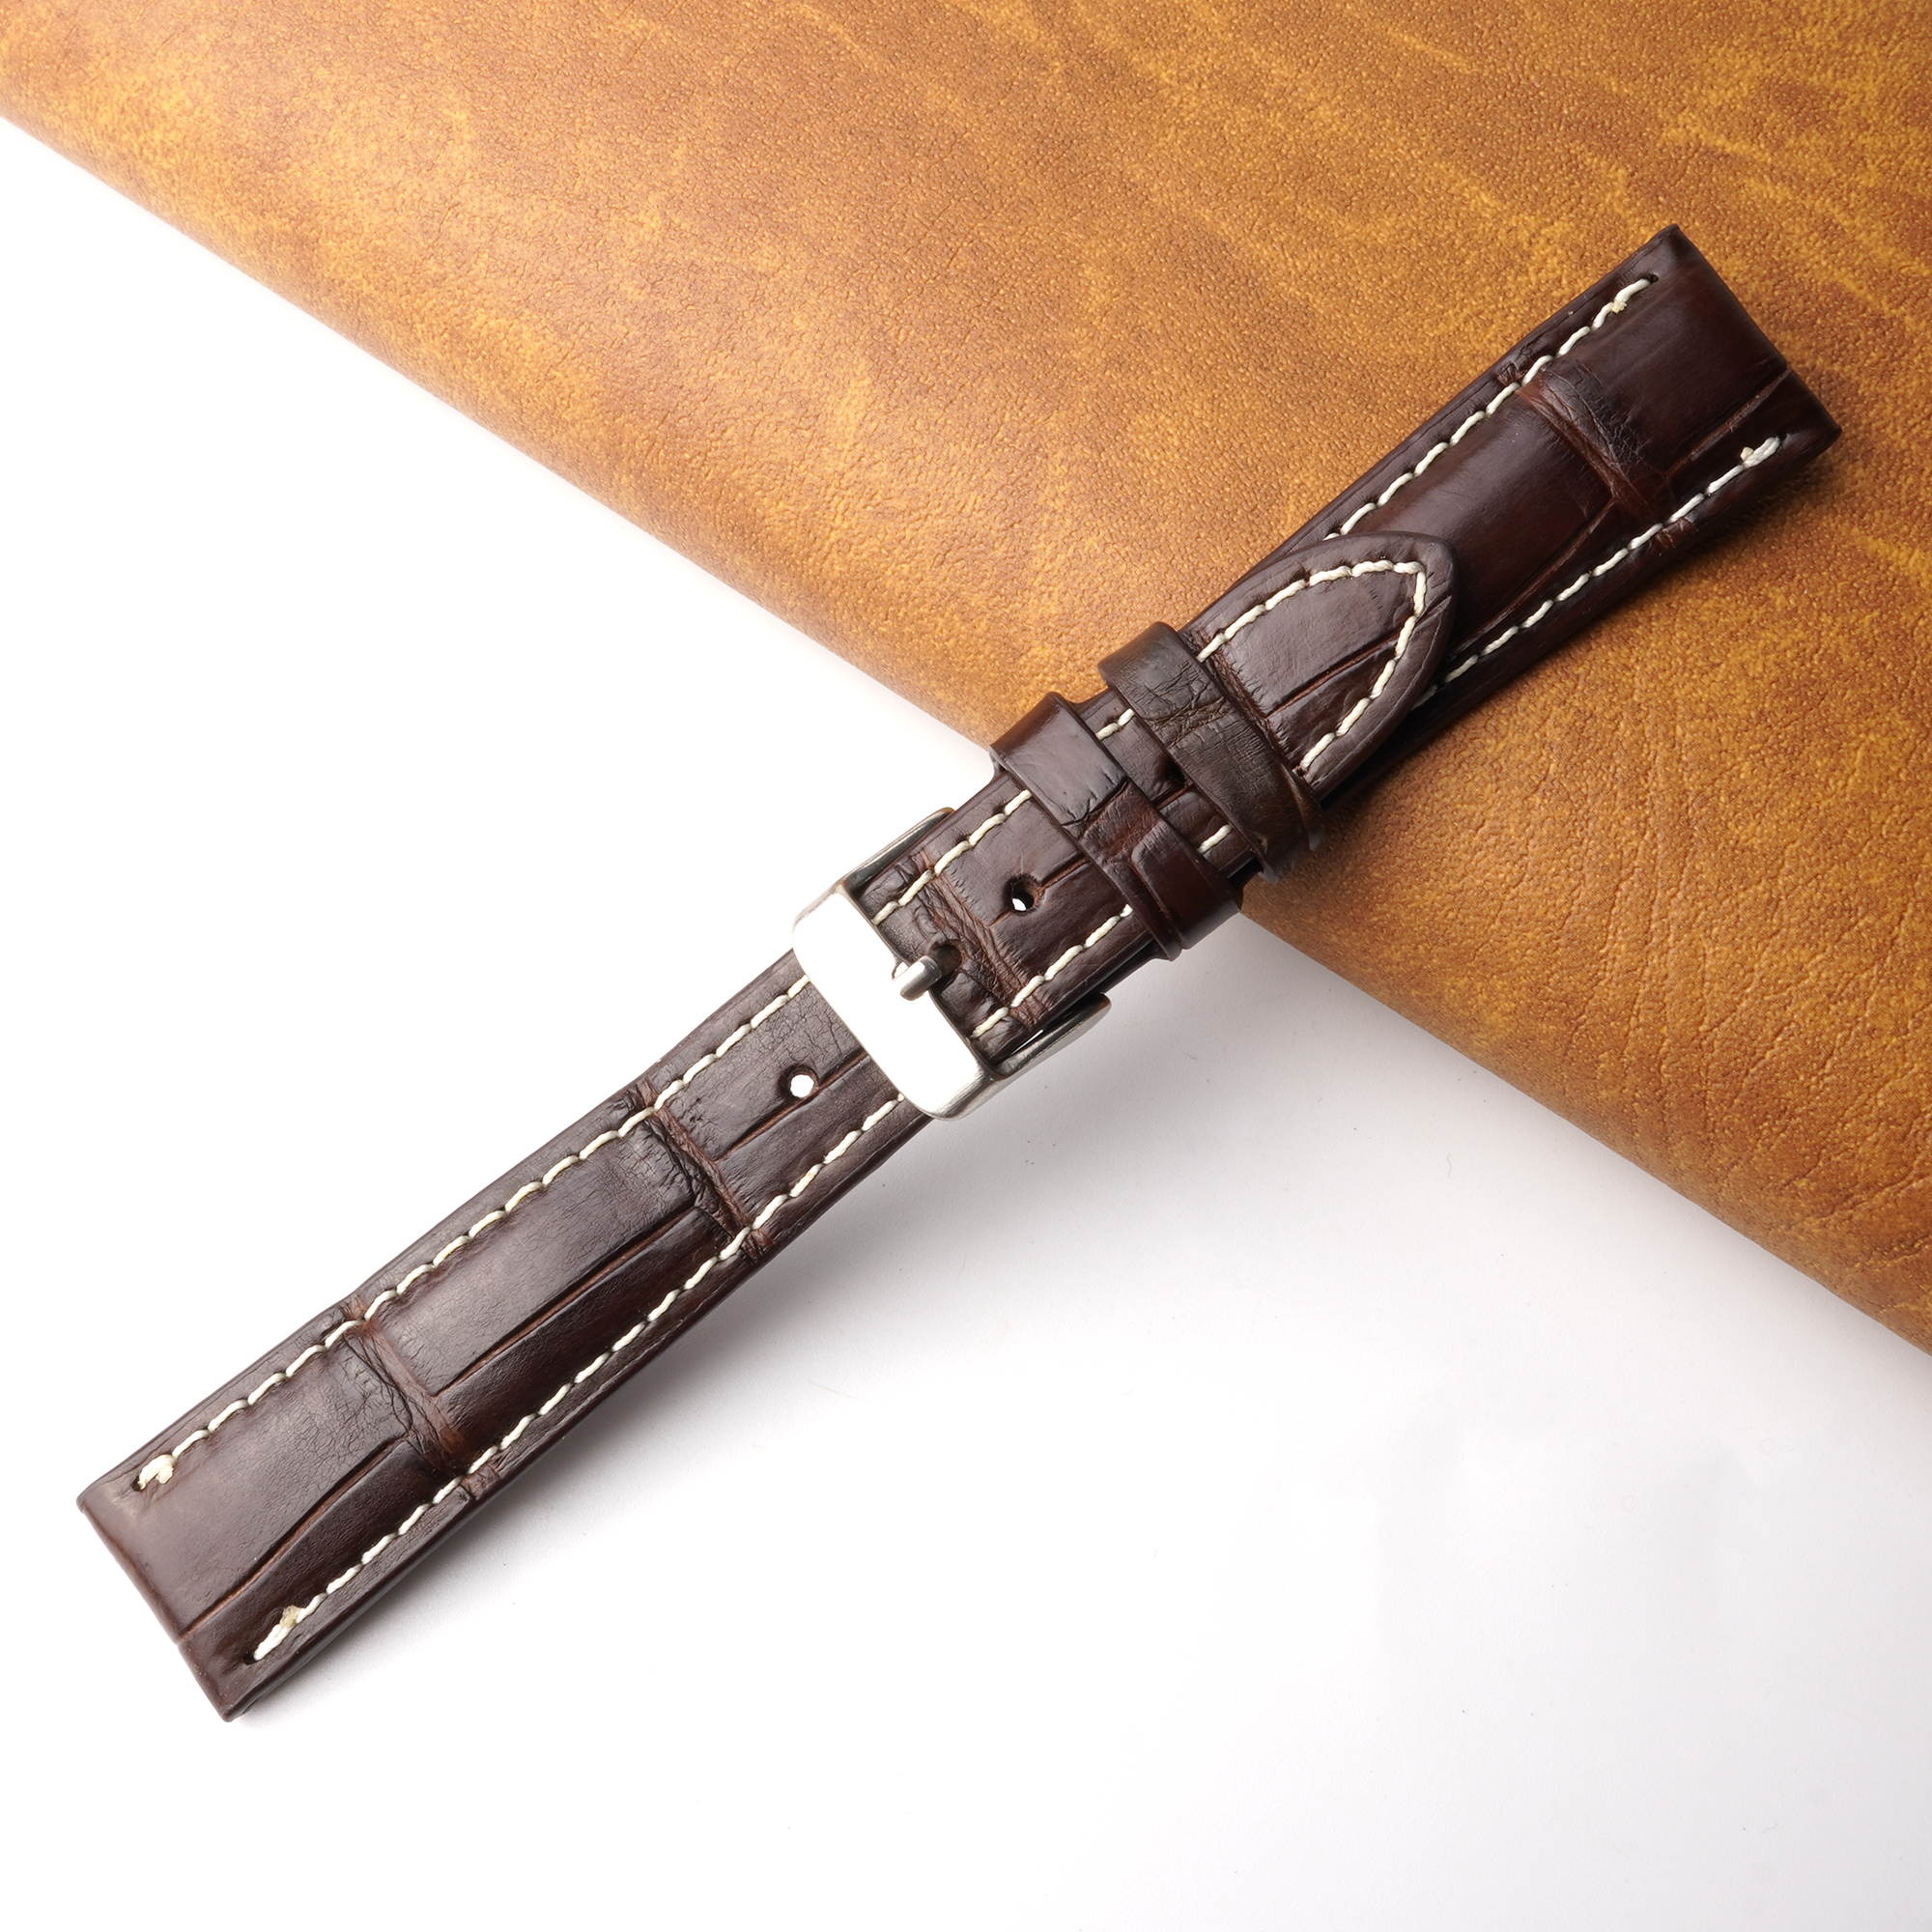 19mm Dark Brown Unique Alligator Leather Watch Band For Men | DH-77A